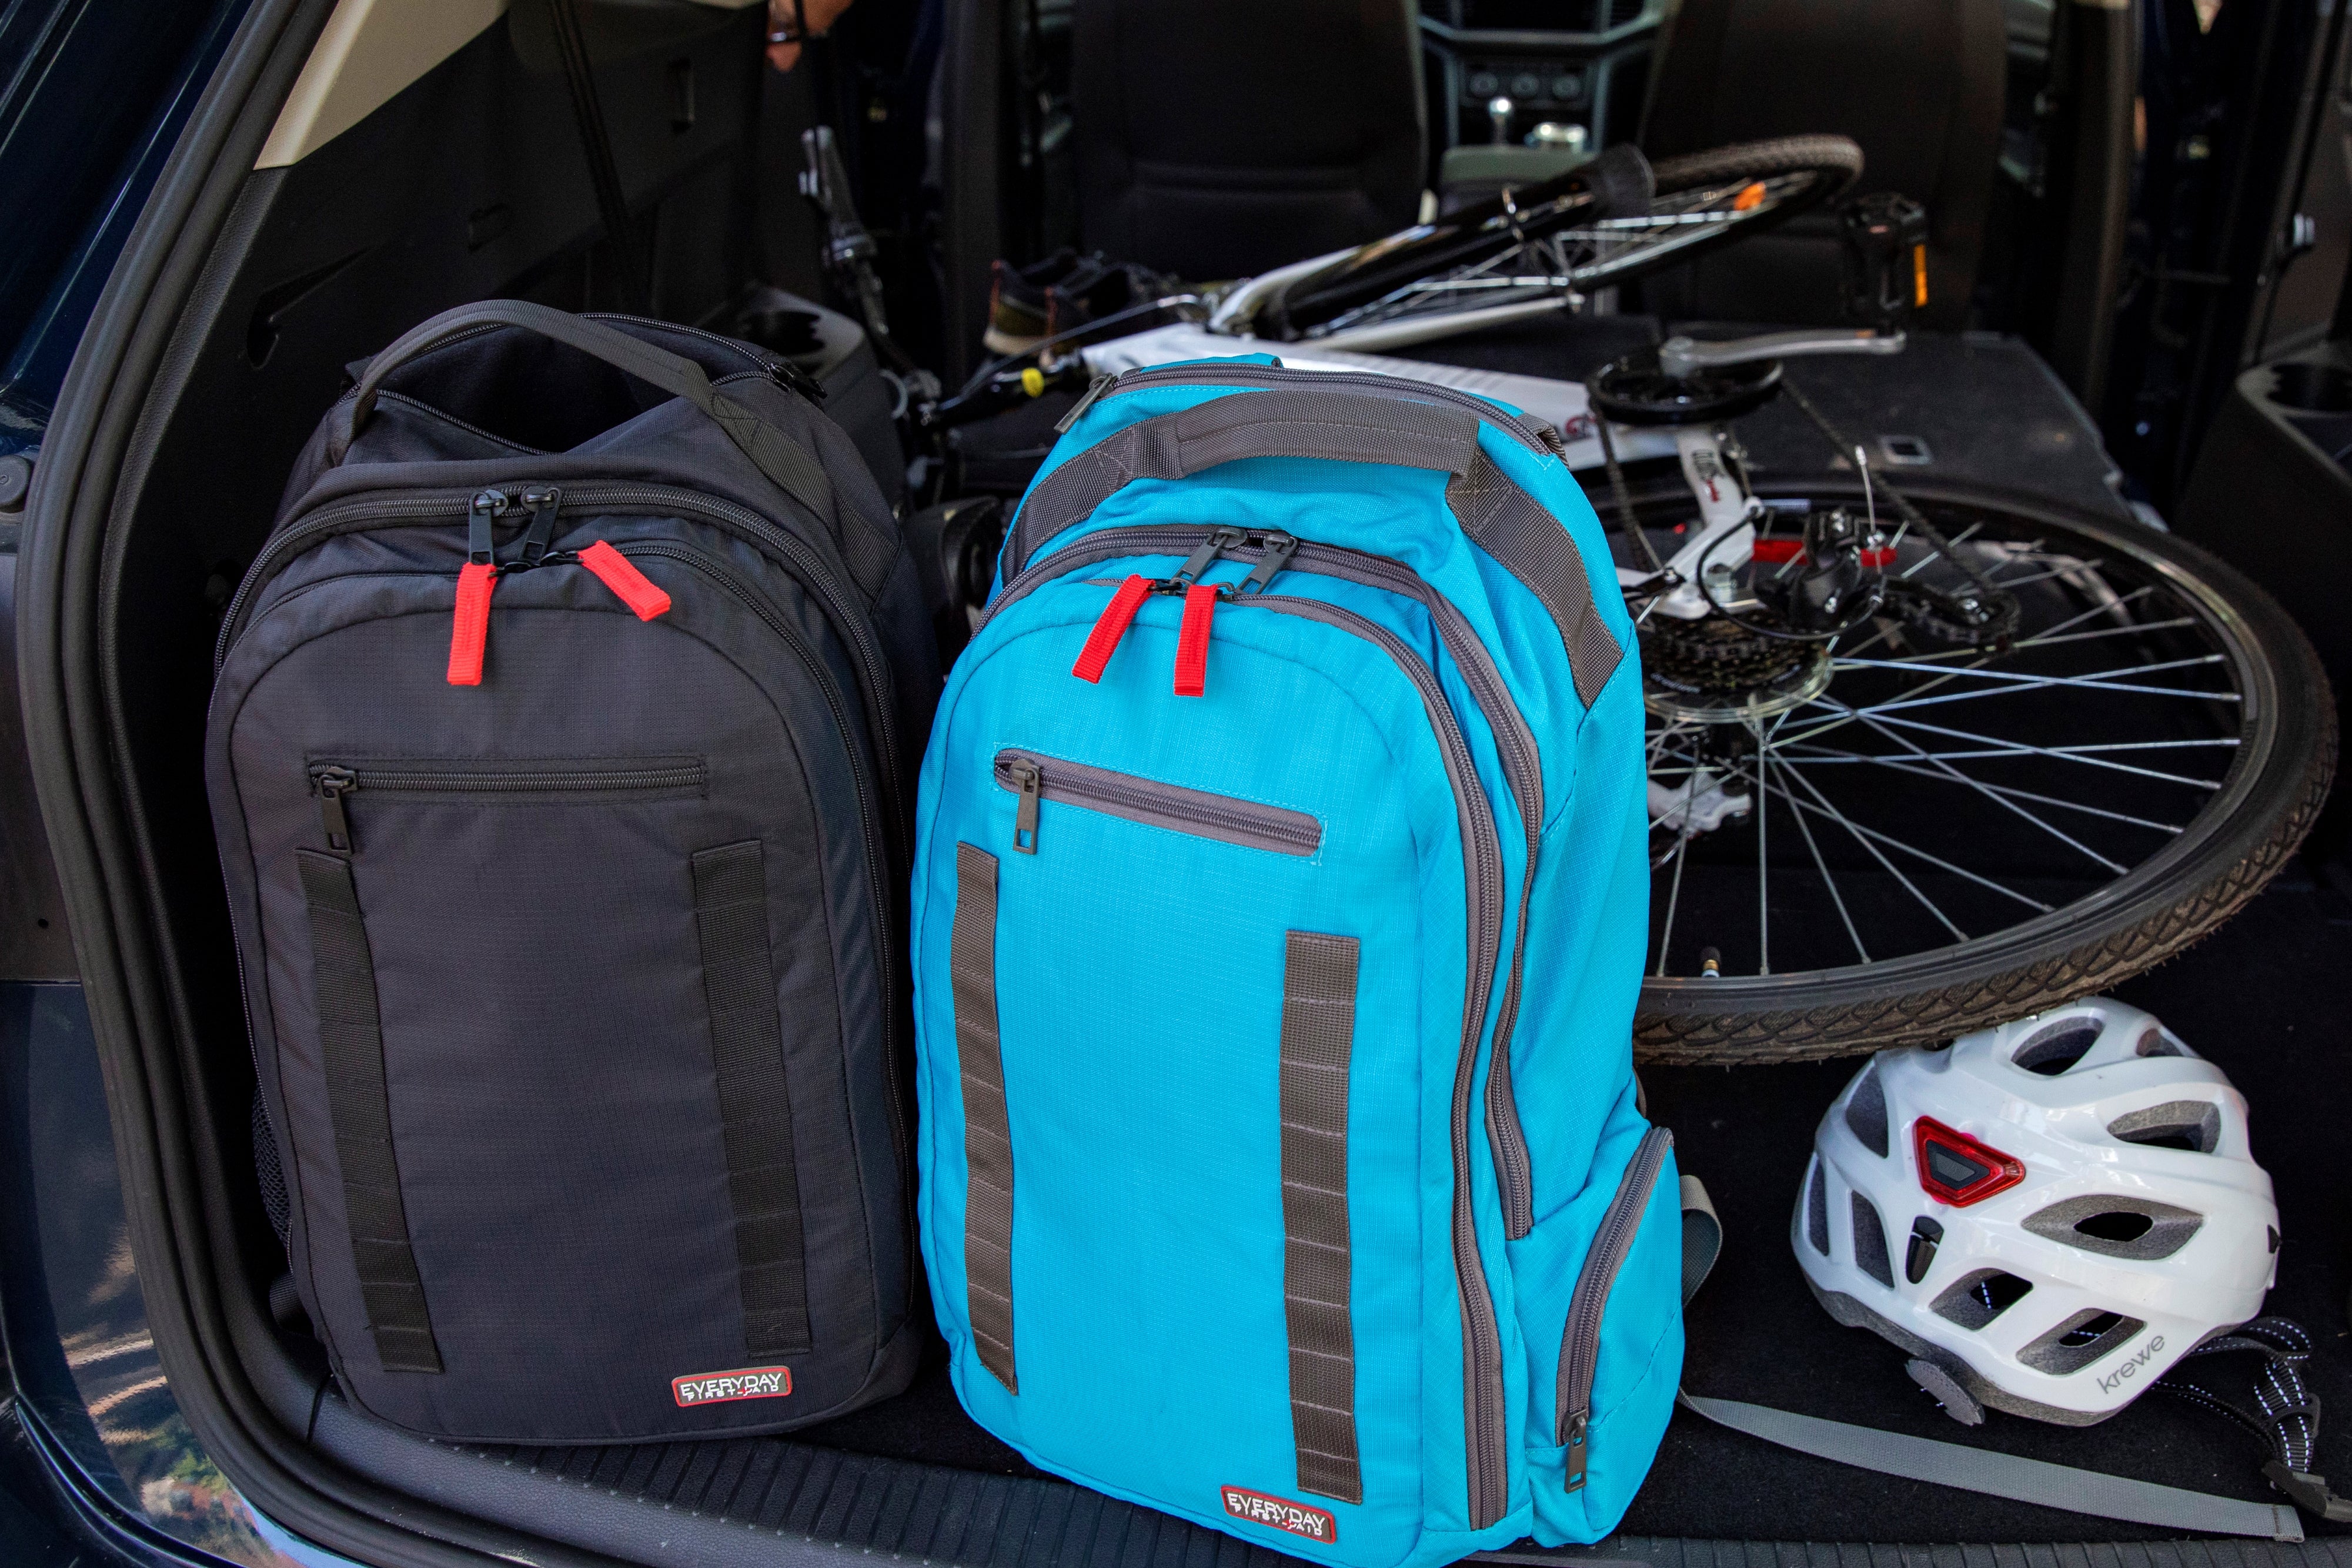 black and blue first aid backpack in back of car with bike and bike helmet